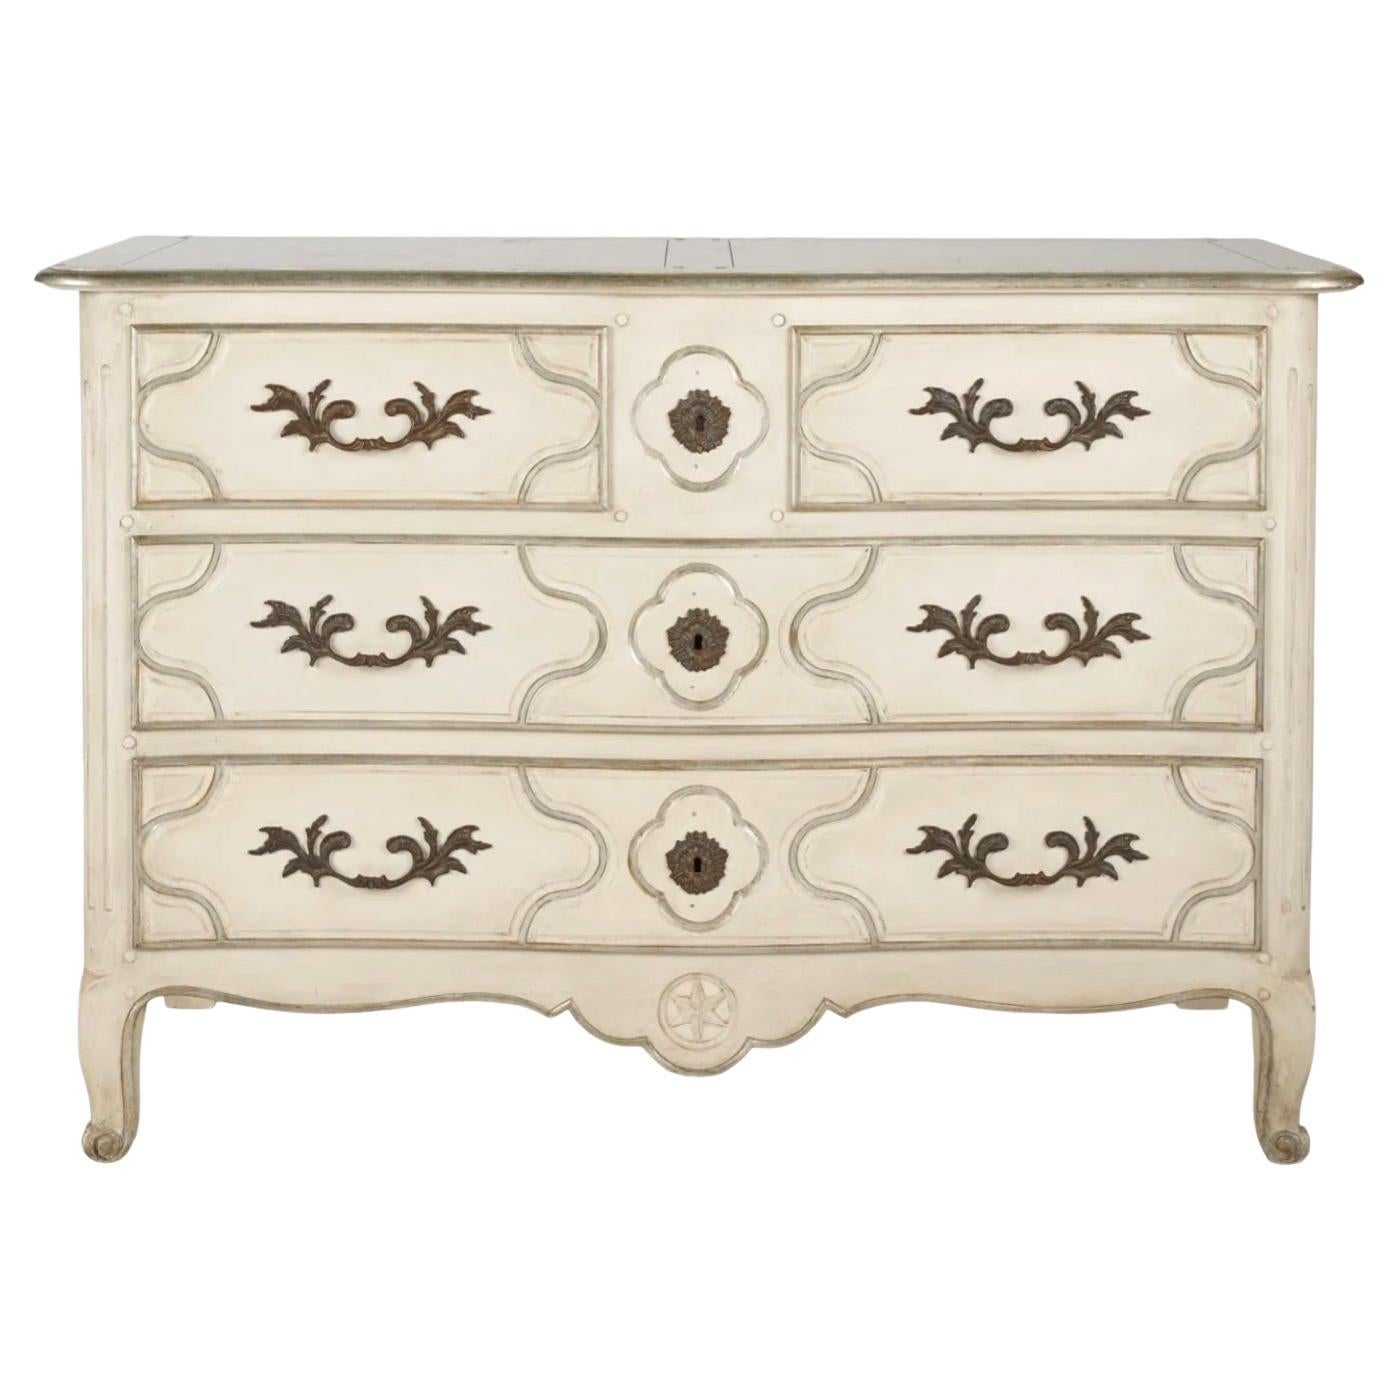 This is a French Louis XV style painted commode / chest by Baker Furniture Company. It has silver gilt and French gray accents and dovetail construction. It is in very good condition. 

My shipping is for the Continental US only and can run as much